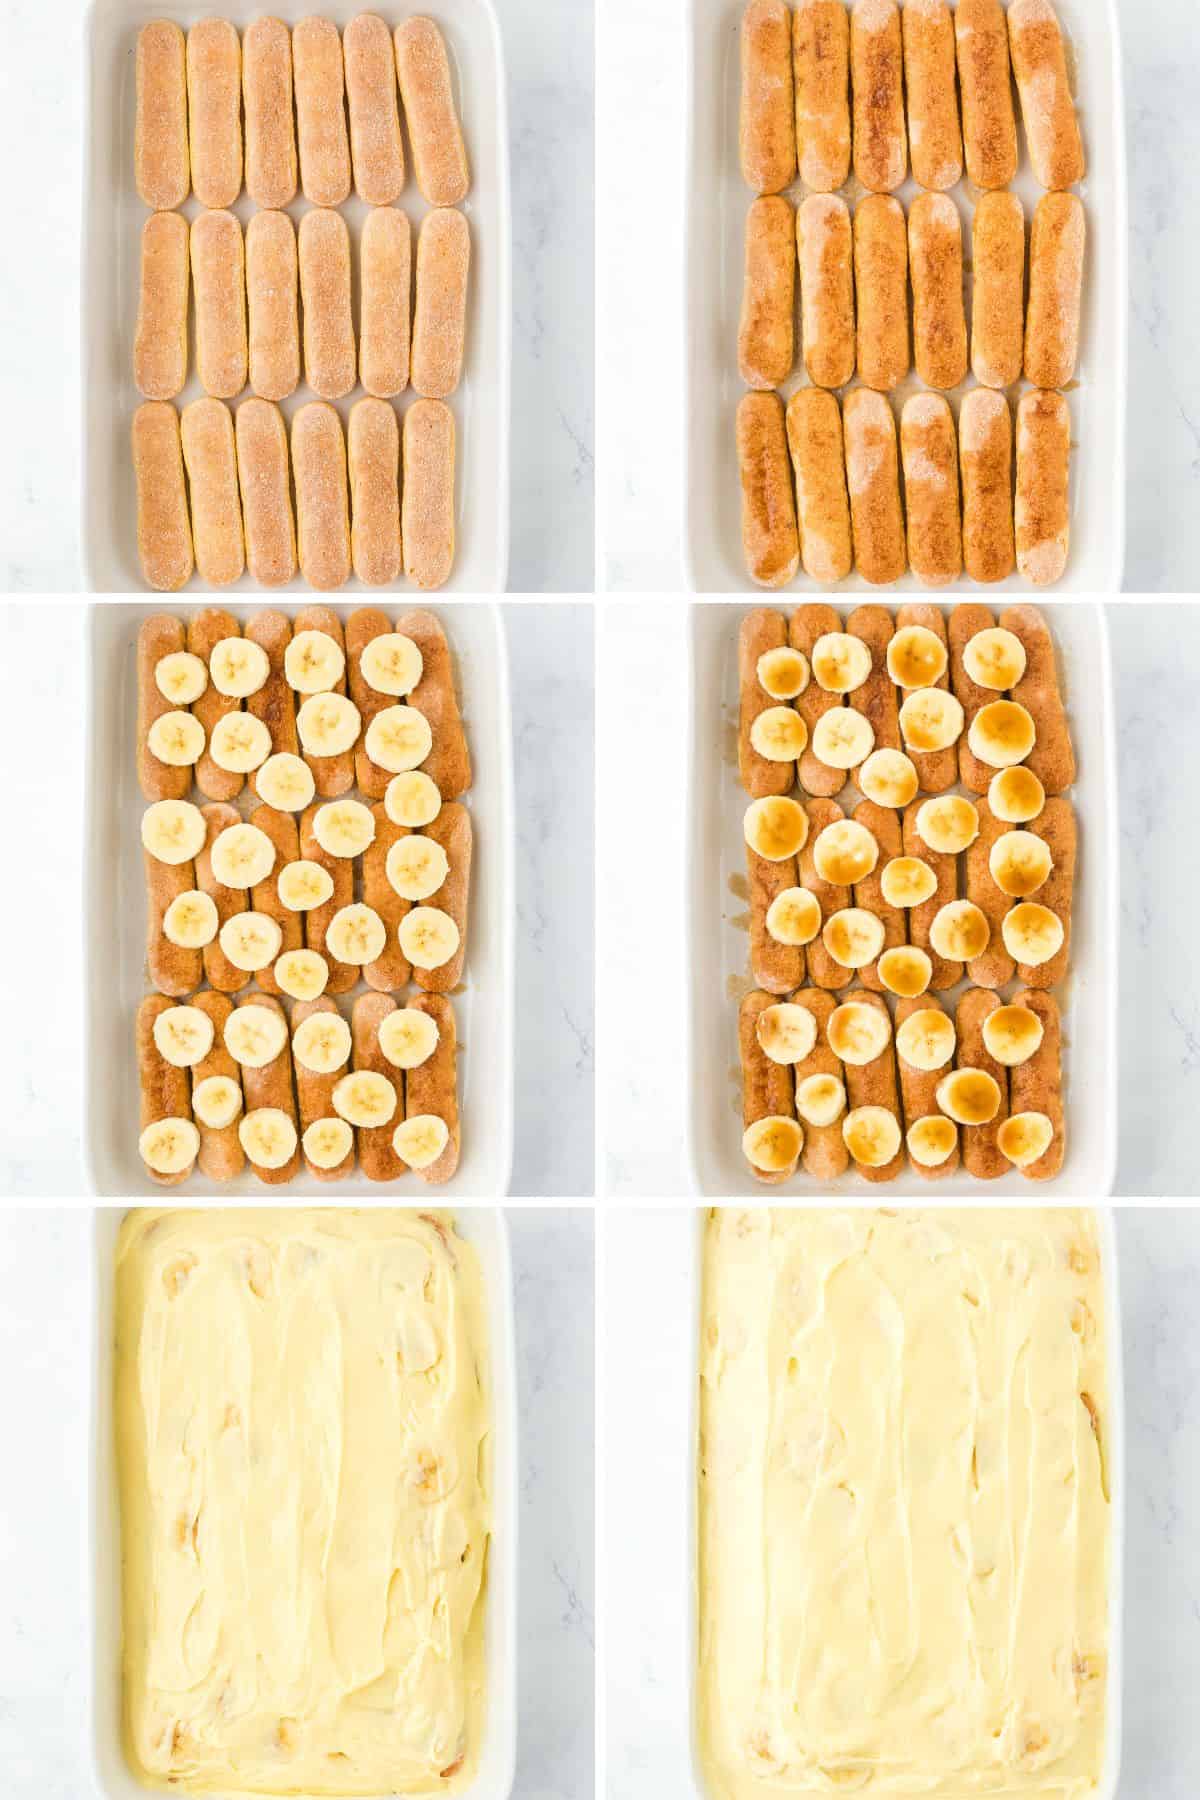 A collage showing layering the ladyfingers, bananas, and tiramisu filling to make the dessert.